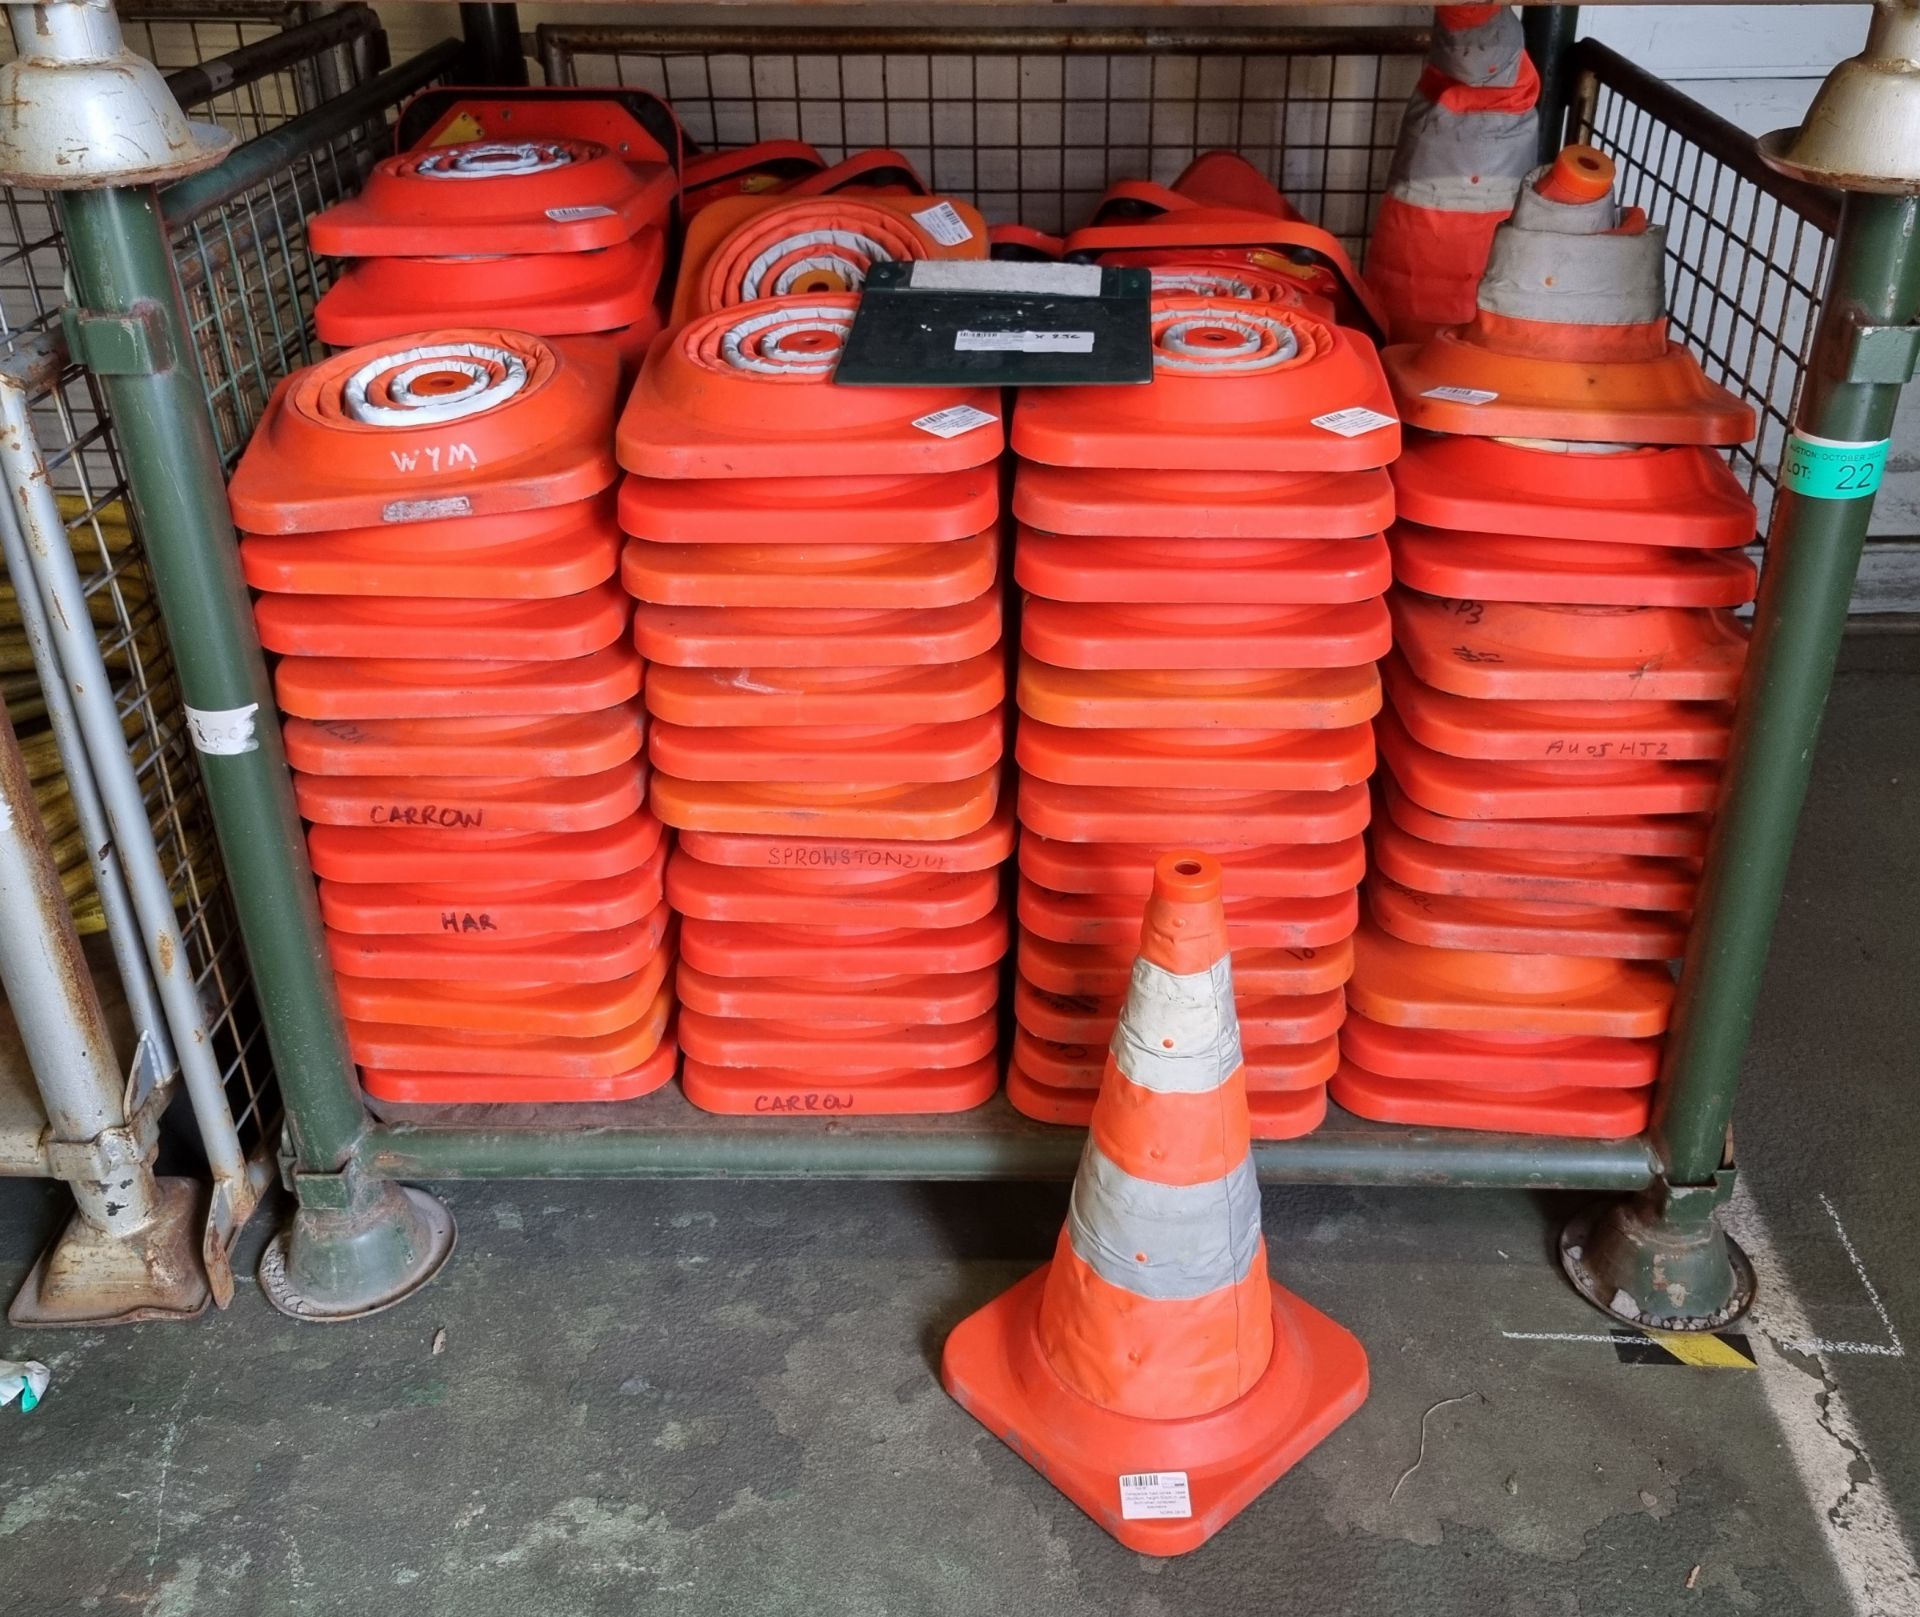 256x Collapsible road cones - base 28x28cm, height 50cm in use, 8cm when collapsed - stackable